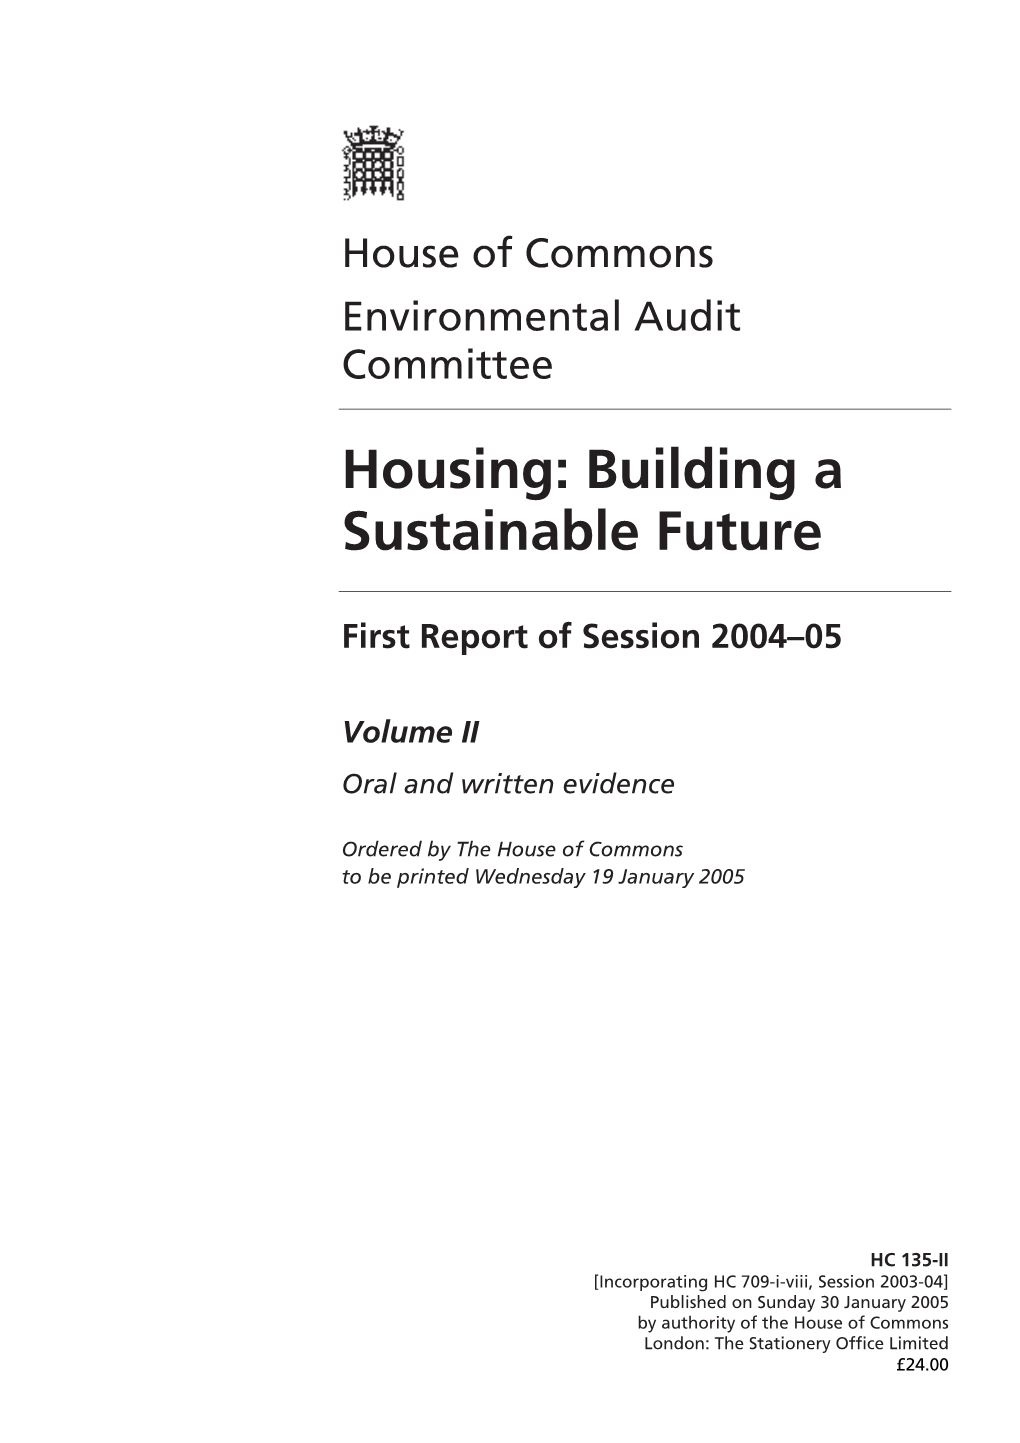 Housing: Building a Sustainable Future